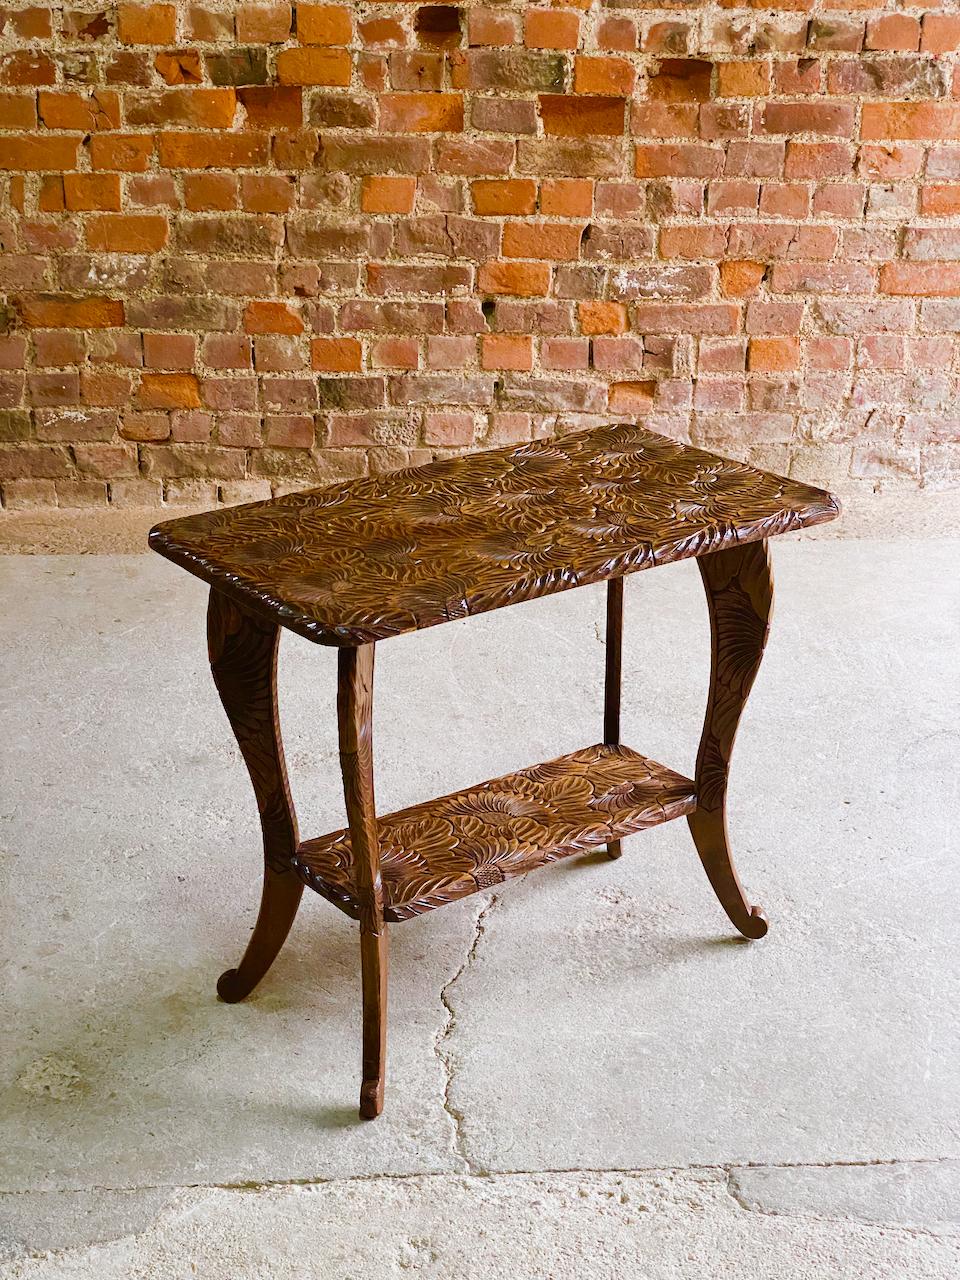 Antique Japanese hand carved cherrywood side table circa 1920

Stunning antique Japanese hand carved cherrywood side table Japan circa 1920, the rectangular top with deeply carved flowers covering the entire surface of the table, graphically bold